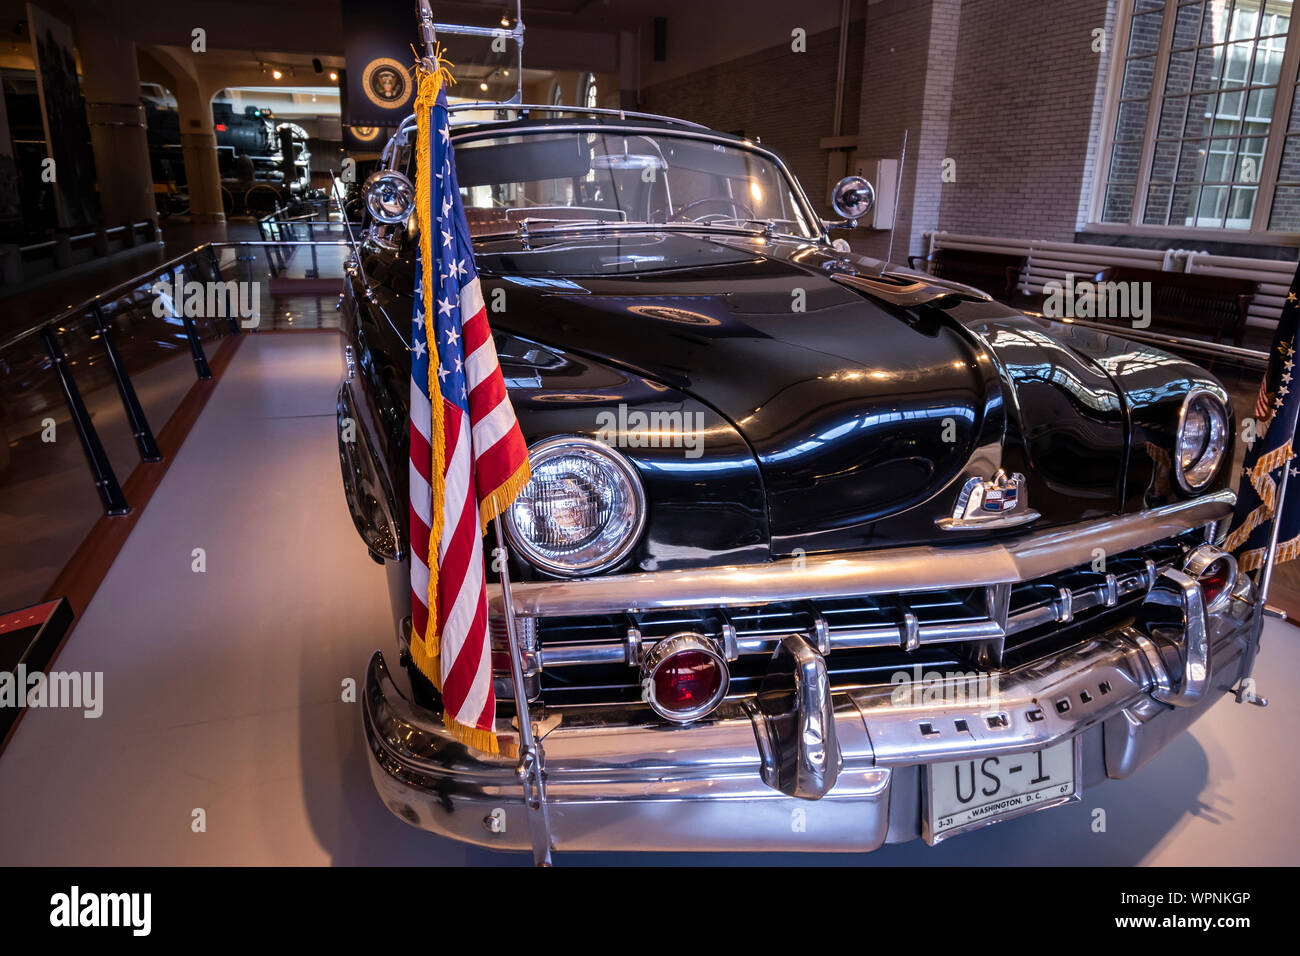 Dearborn, Mi, Usa - March 2019: Dwight D. Eisenhower Bubble Top 1950 Lincoln presidential car presented in the Henry Ford Museum of American Innovatio Stock Photo